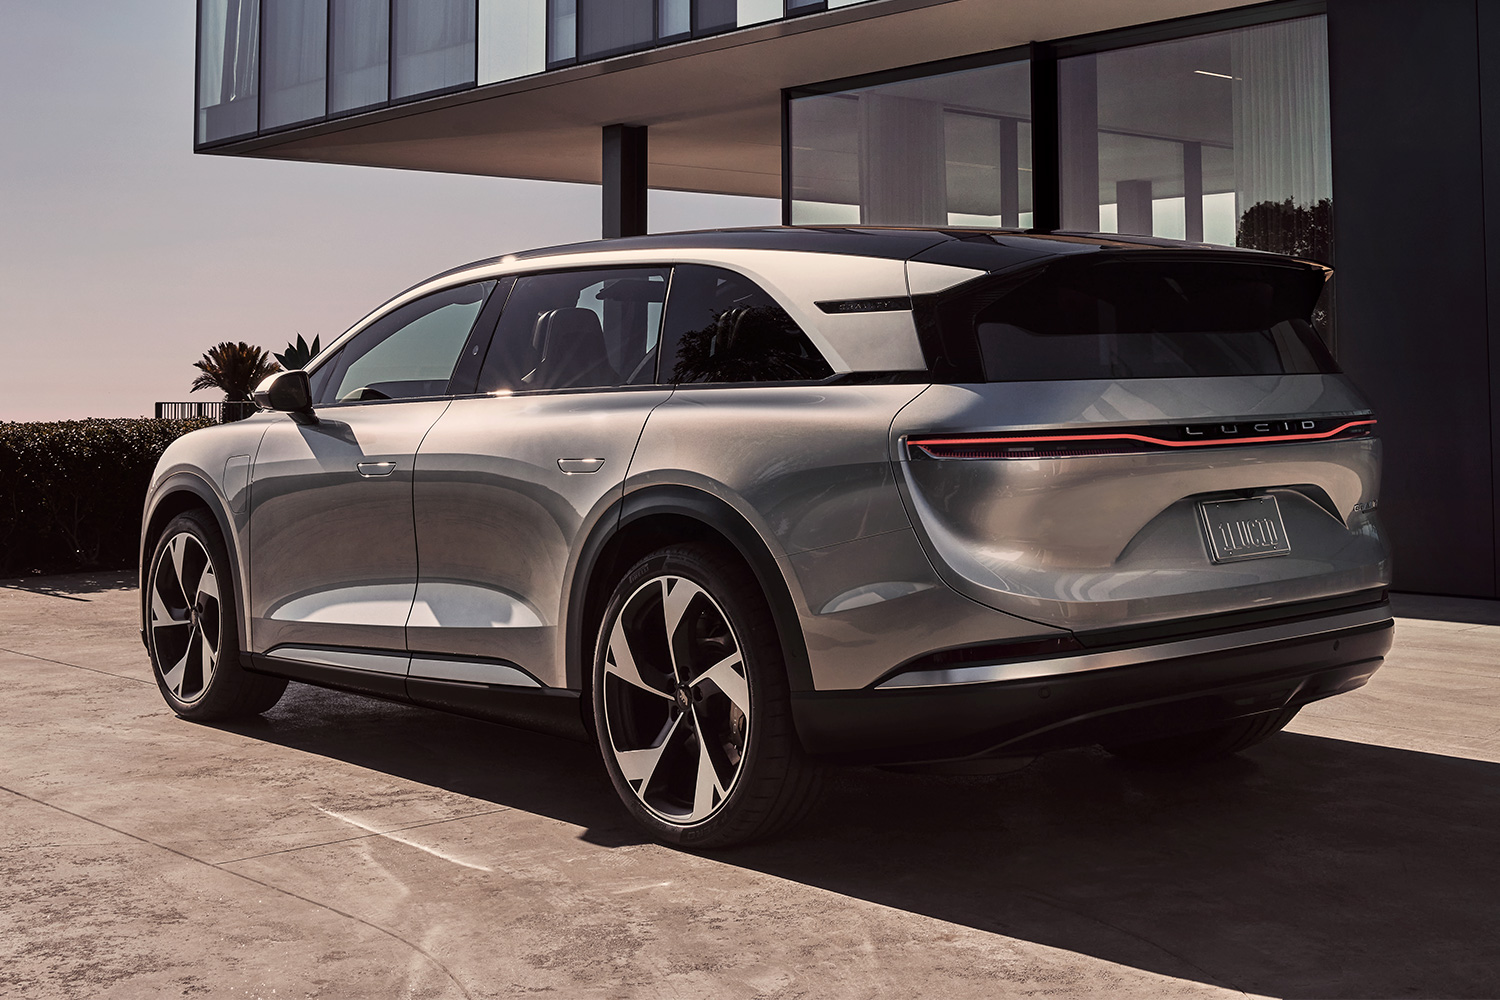 Lucid's new electric SUV, the Gravity